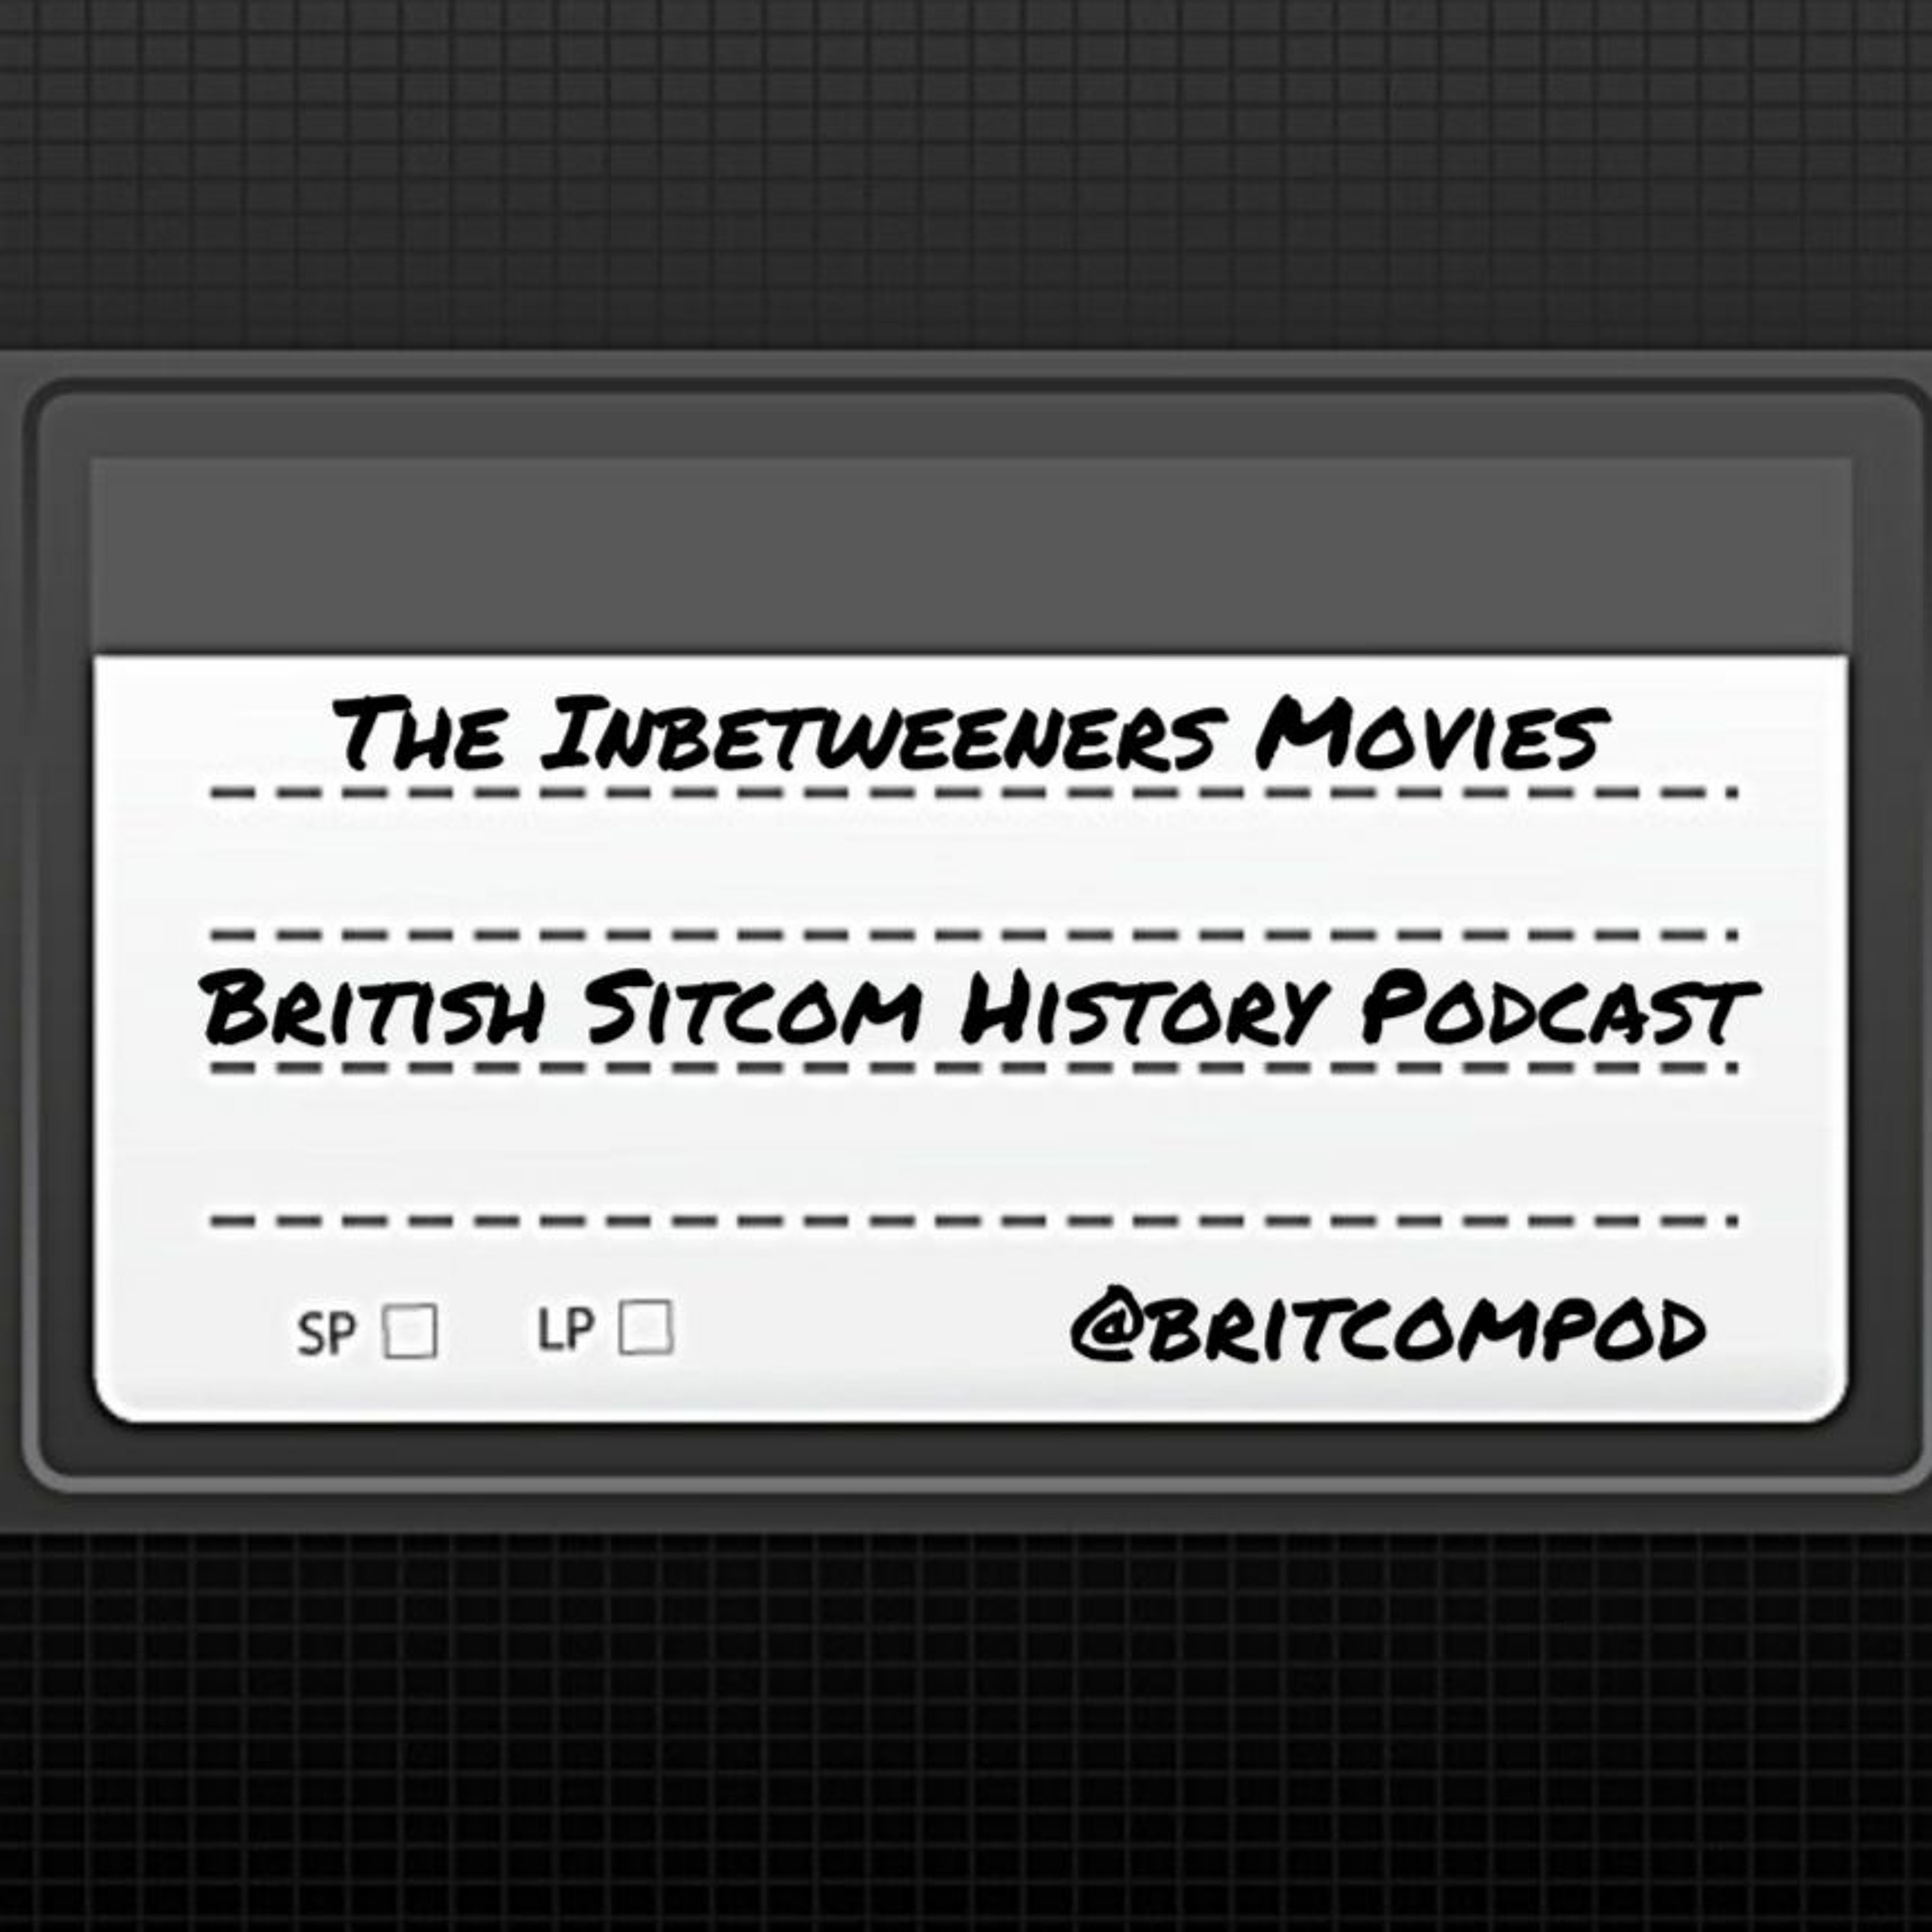 The Inbetweeners Movies with Diminishing Returns Podcast